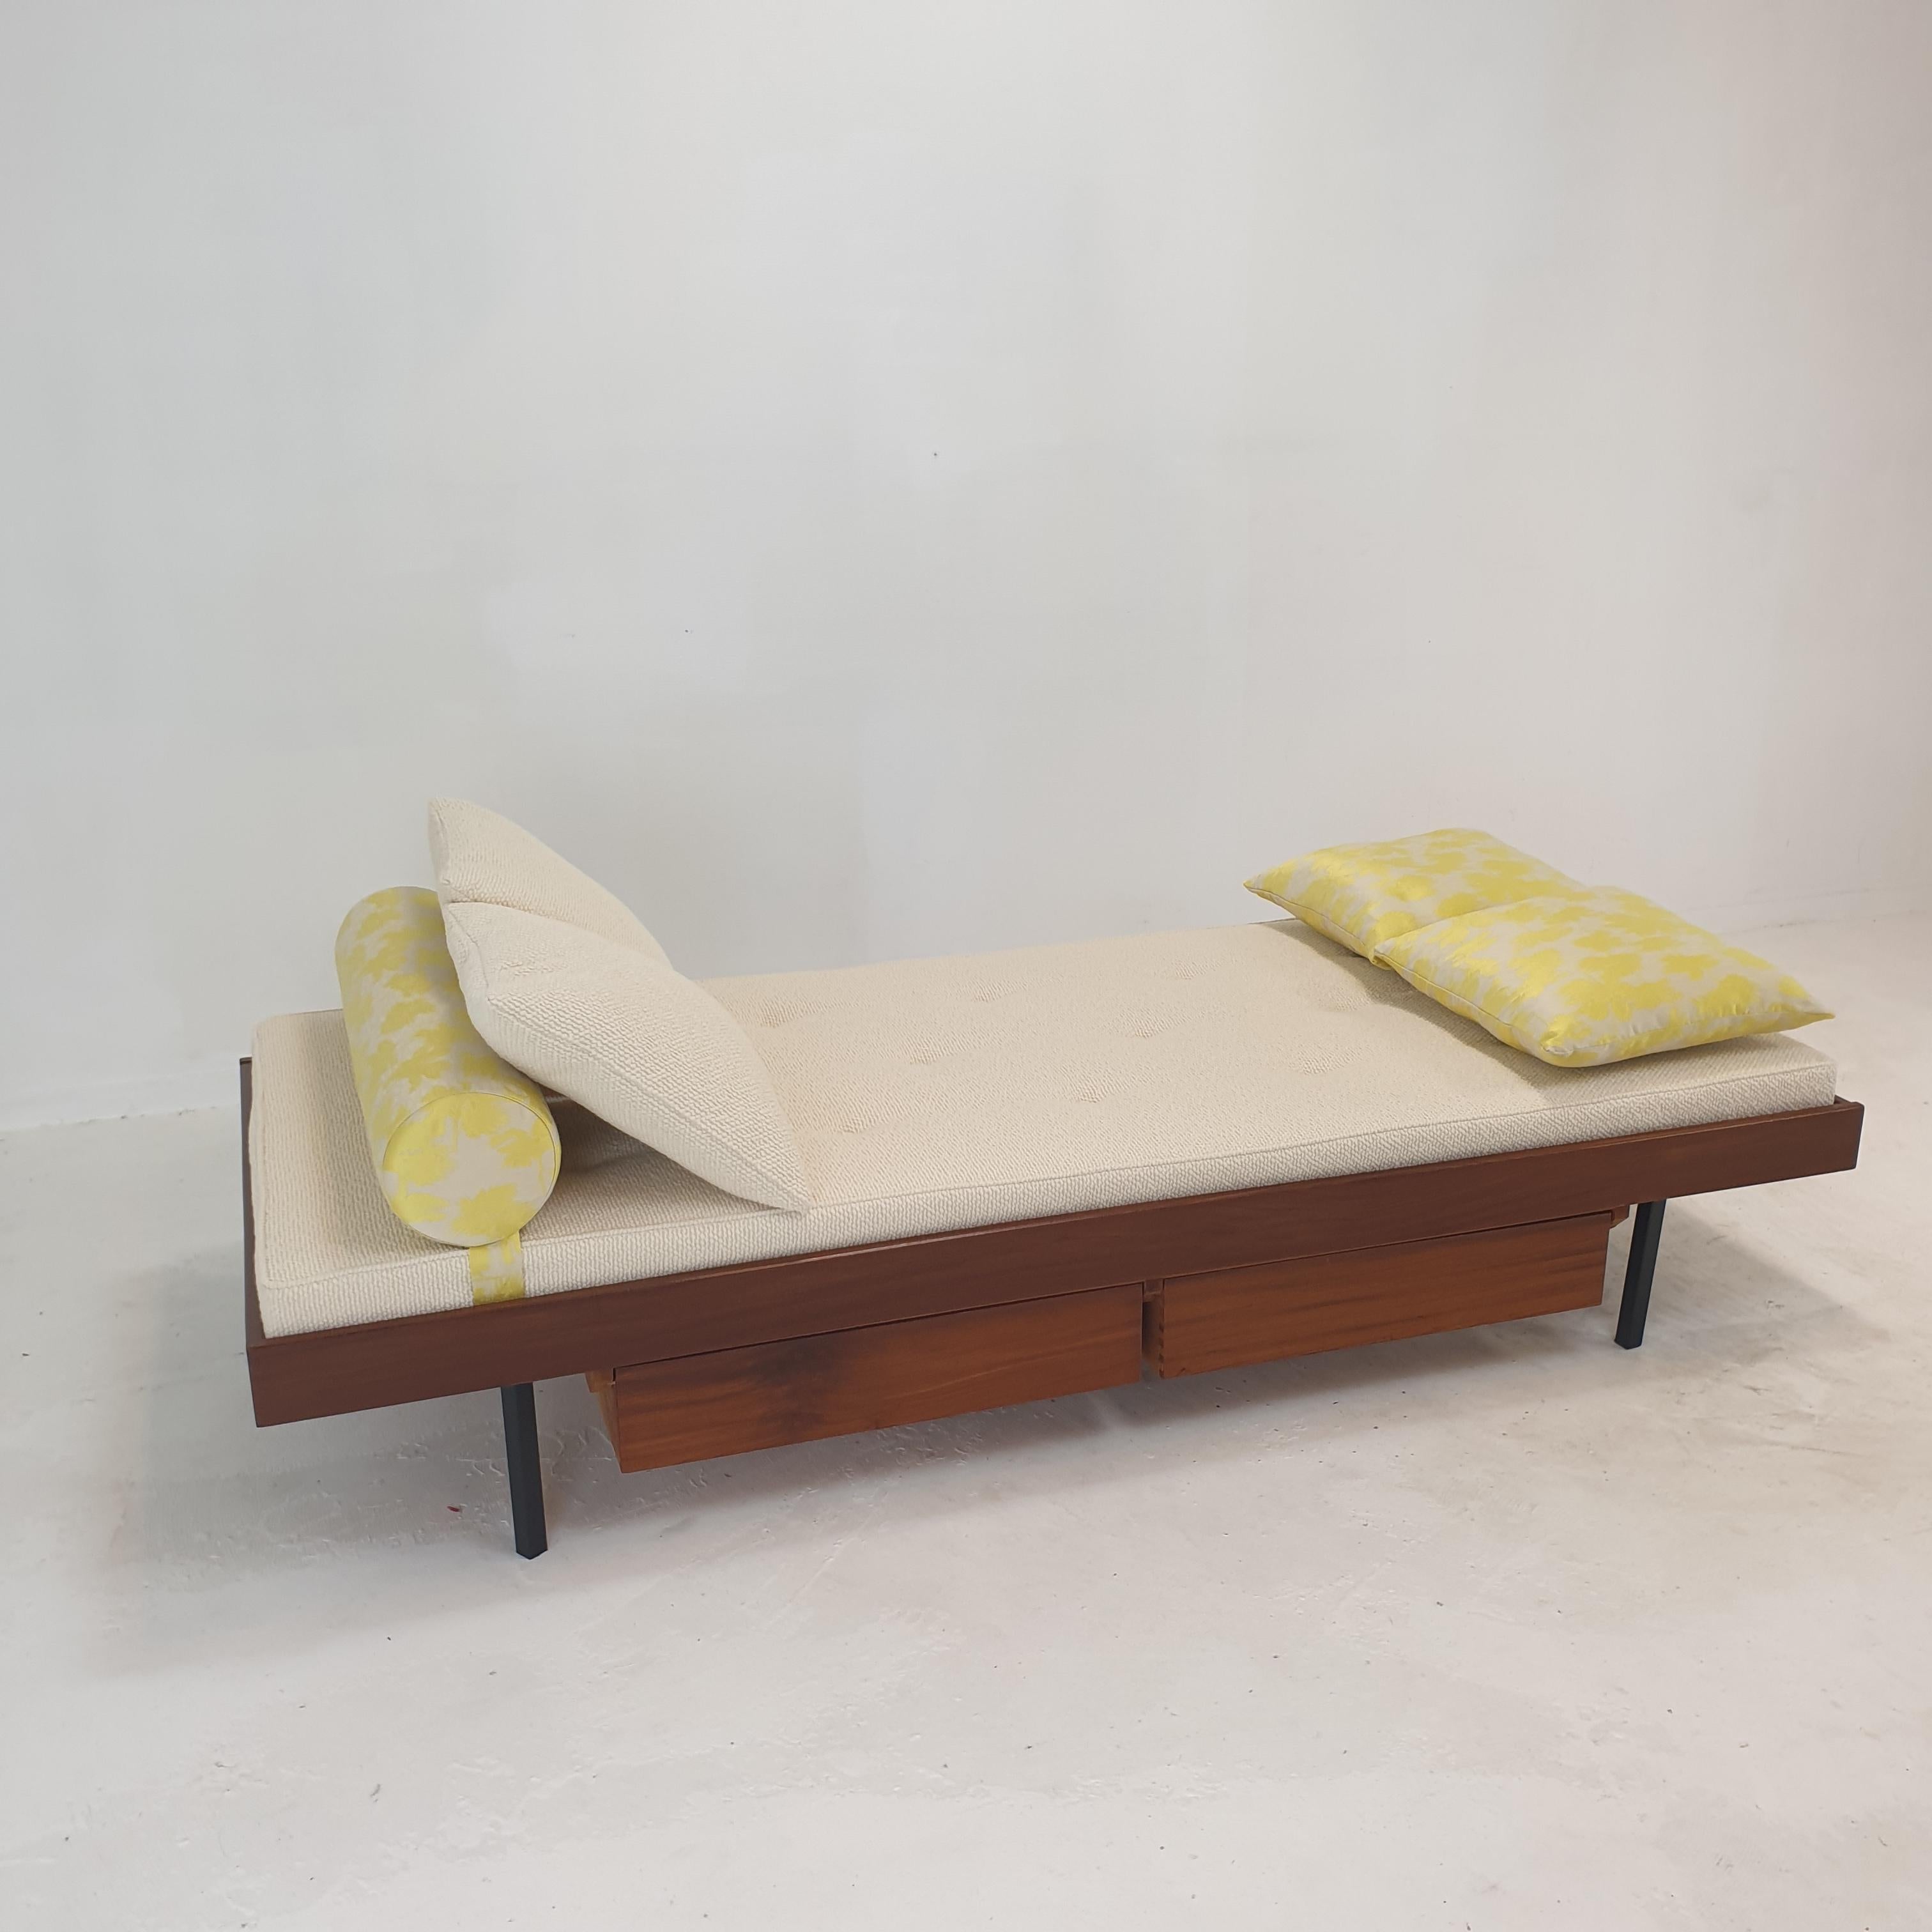 Very nice teak daybed, fabricated in The Netherlands in the 60's. 
Underneath the bed there are two drawers.

The mattress is renewed with new foam and it has just been upholstered with lovely wool fabric, the same for two cushions.

The